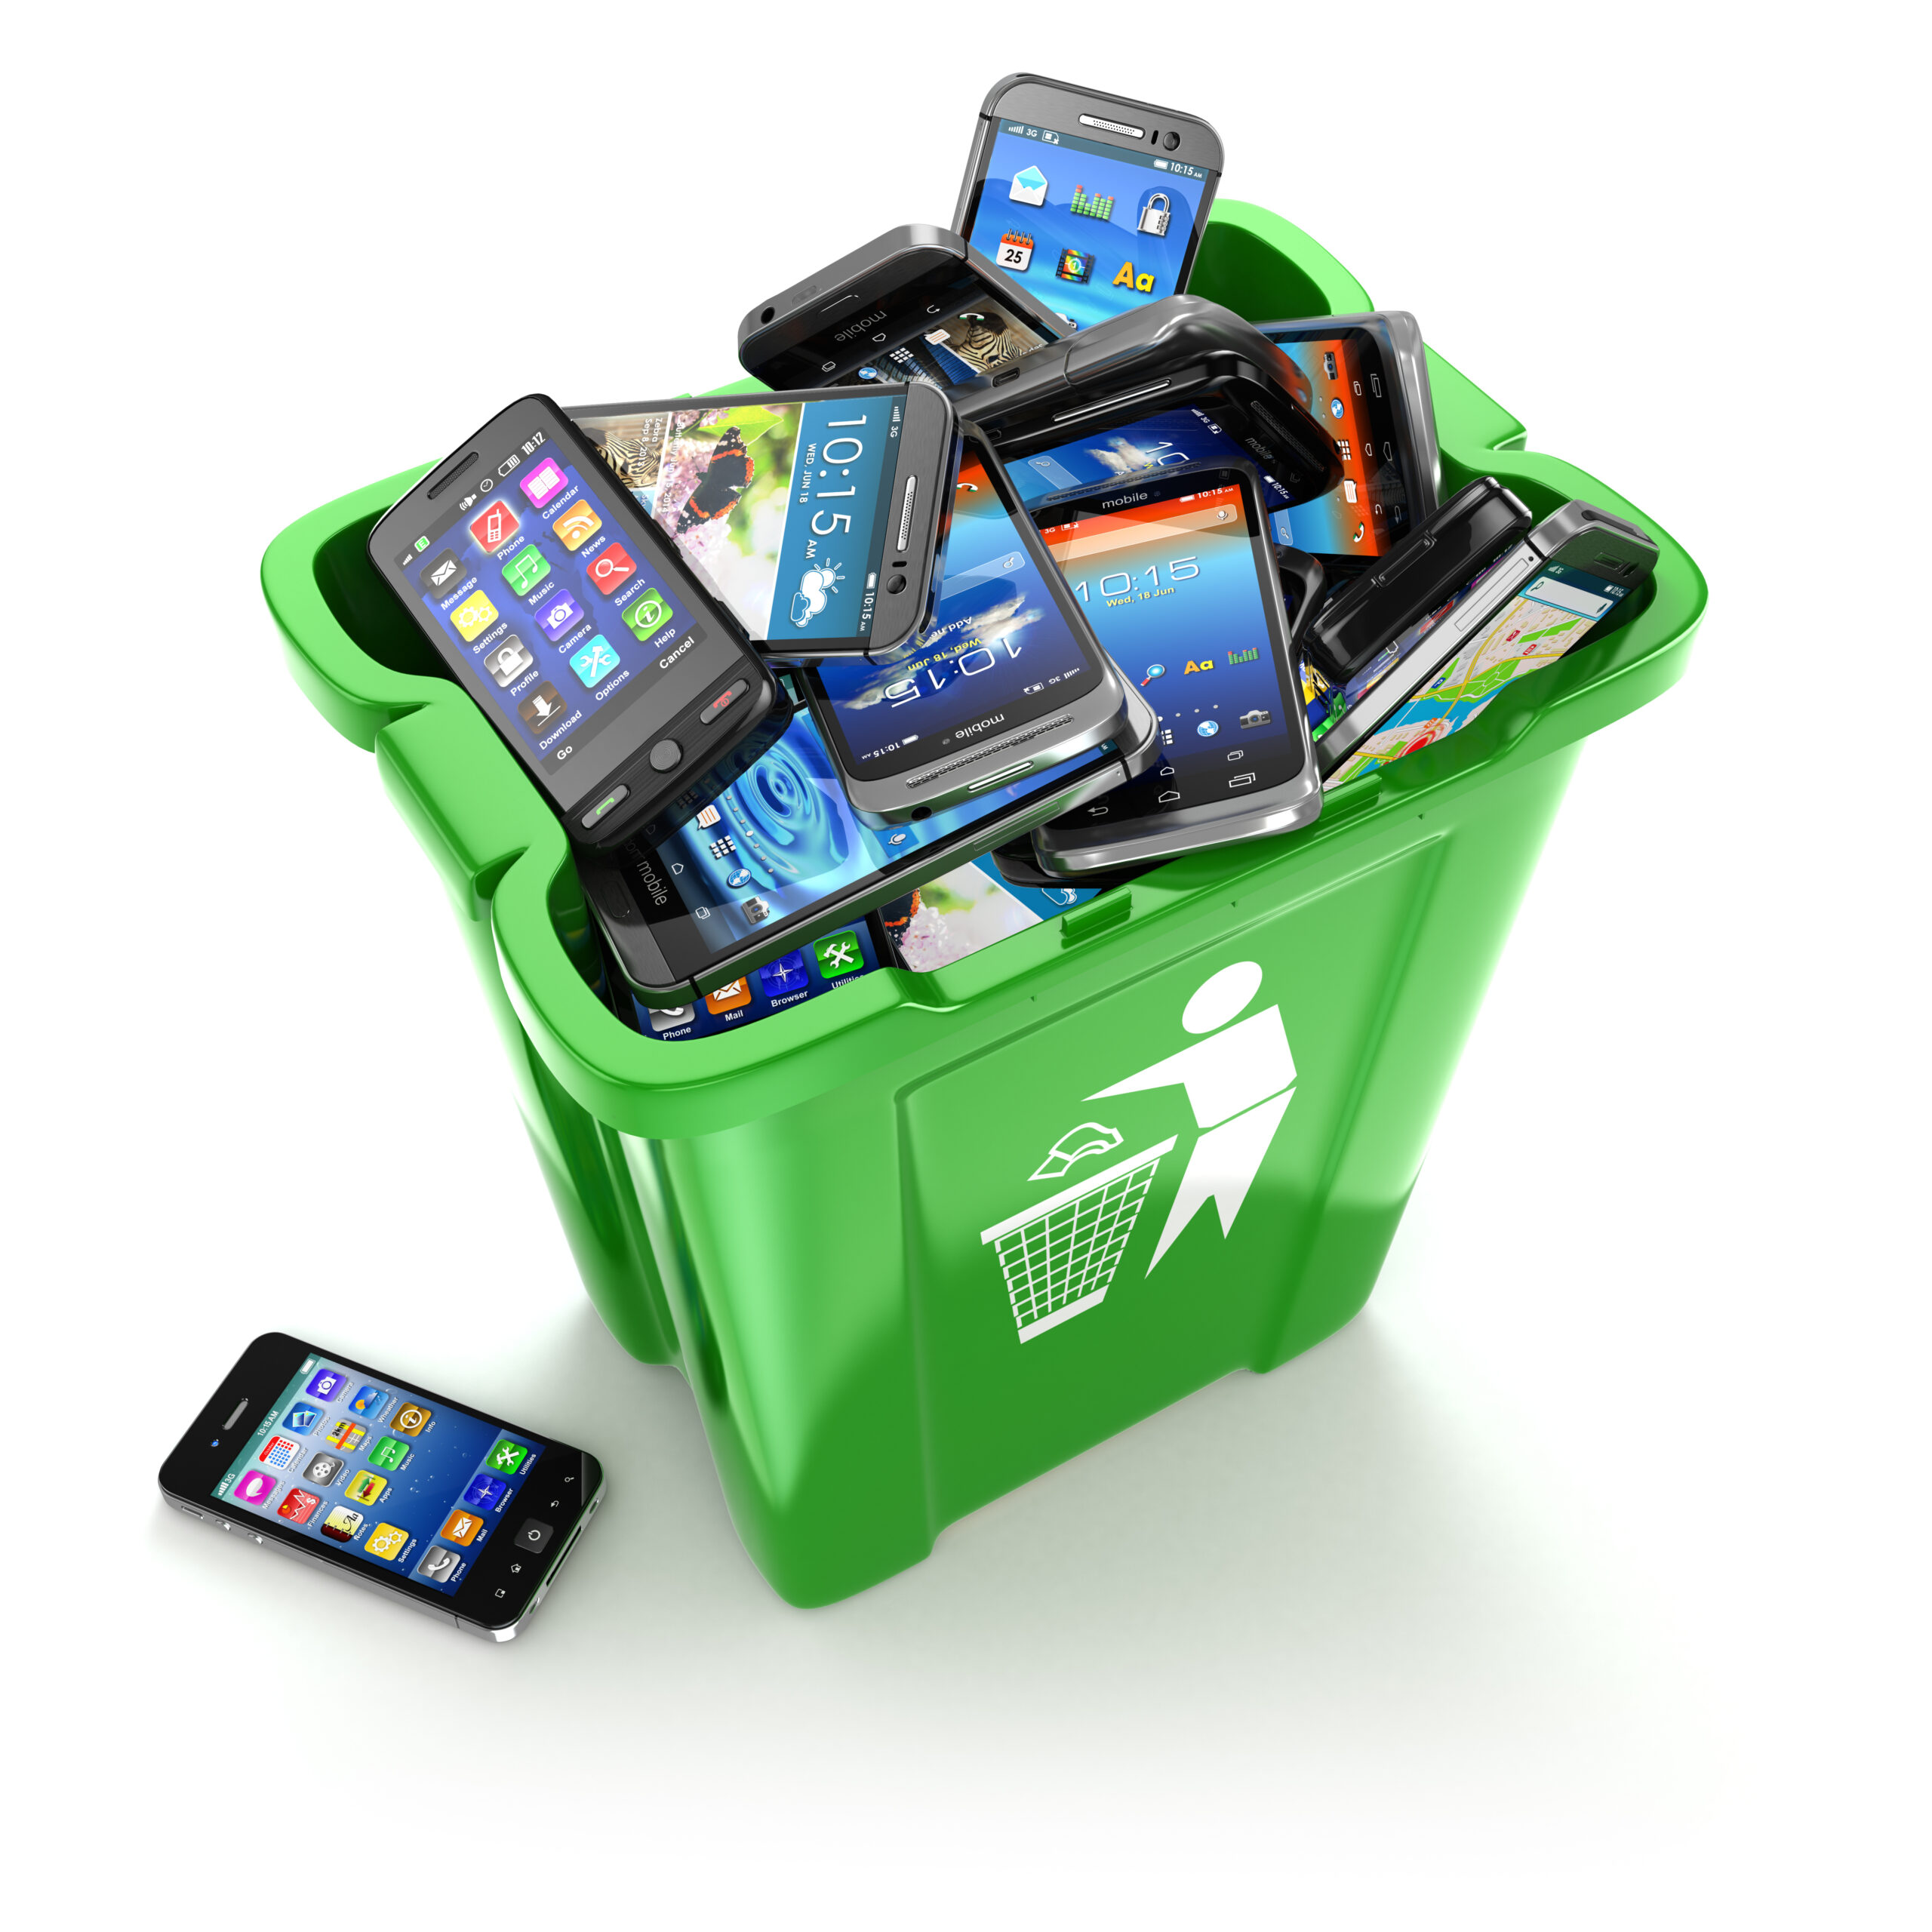 Mobile phones in recycling can